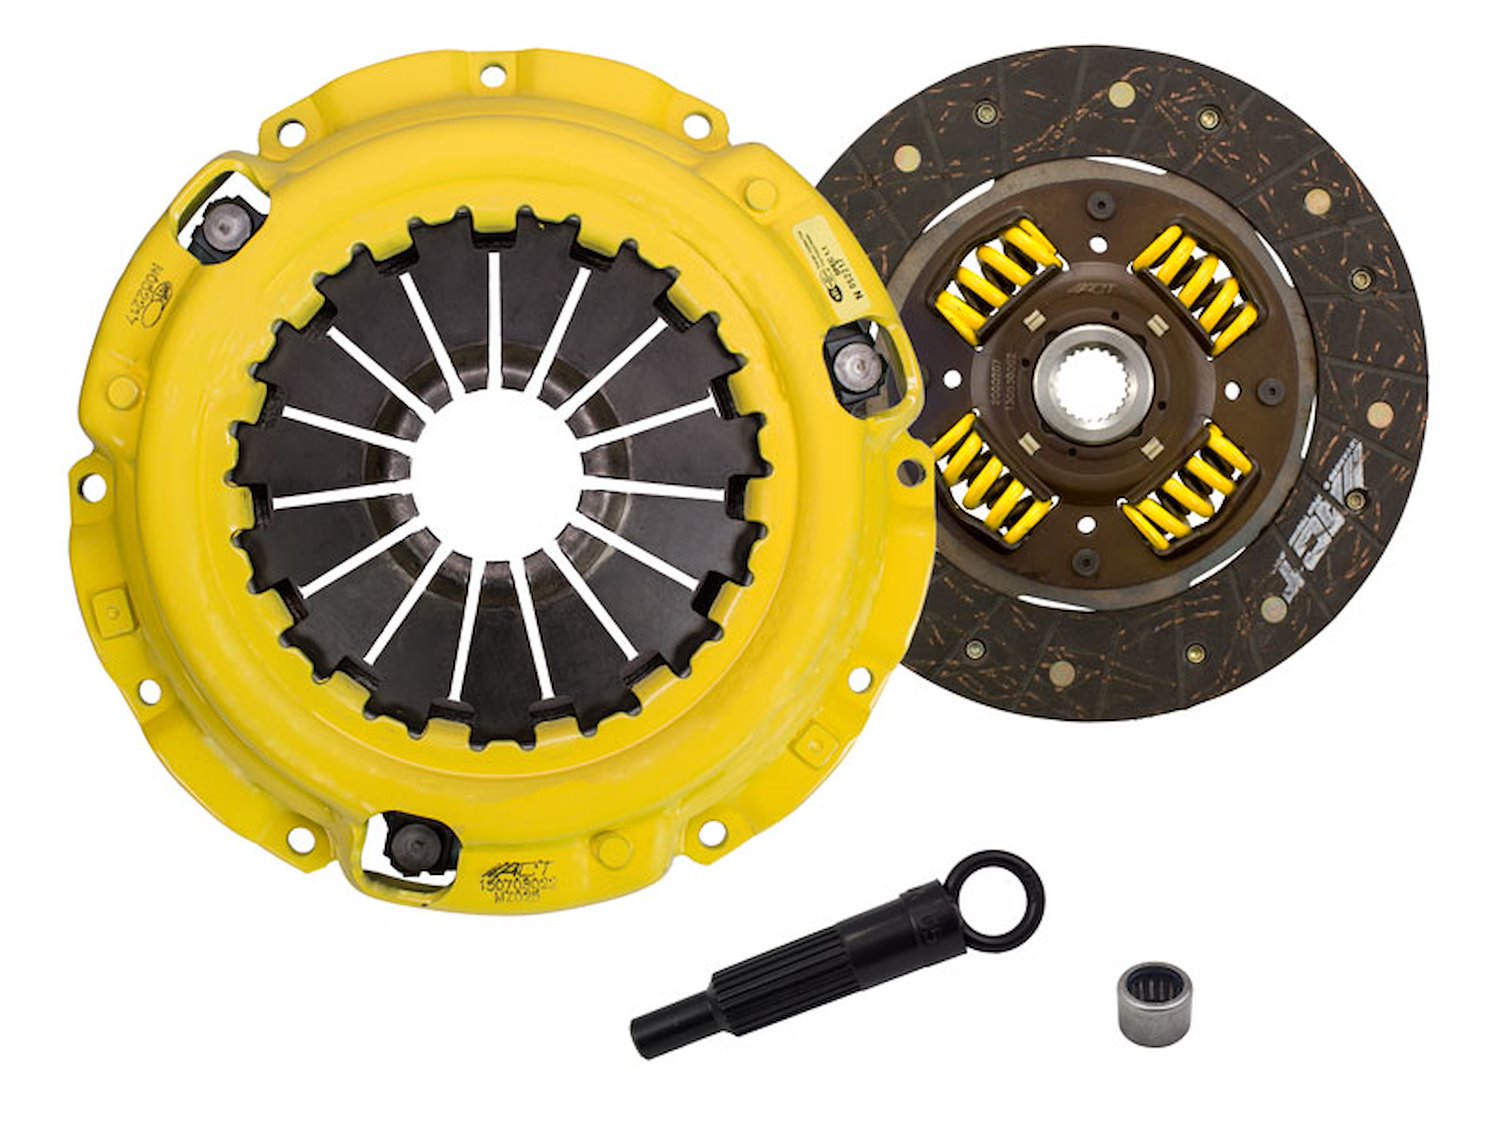 HD/Modified Street Transmission Clutch Kit Fits Select Ford/Lincoln/Mercury/Mazda